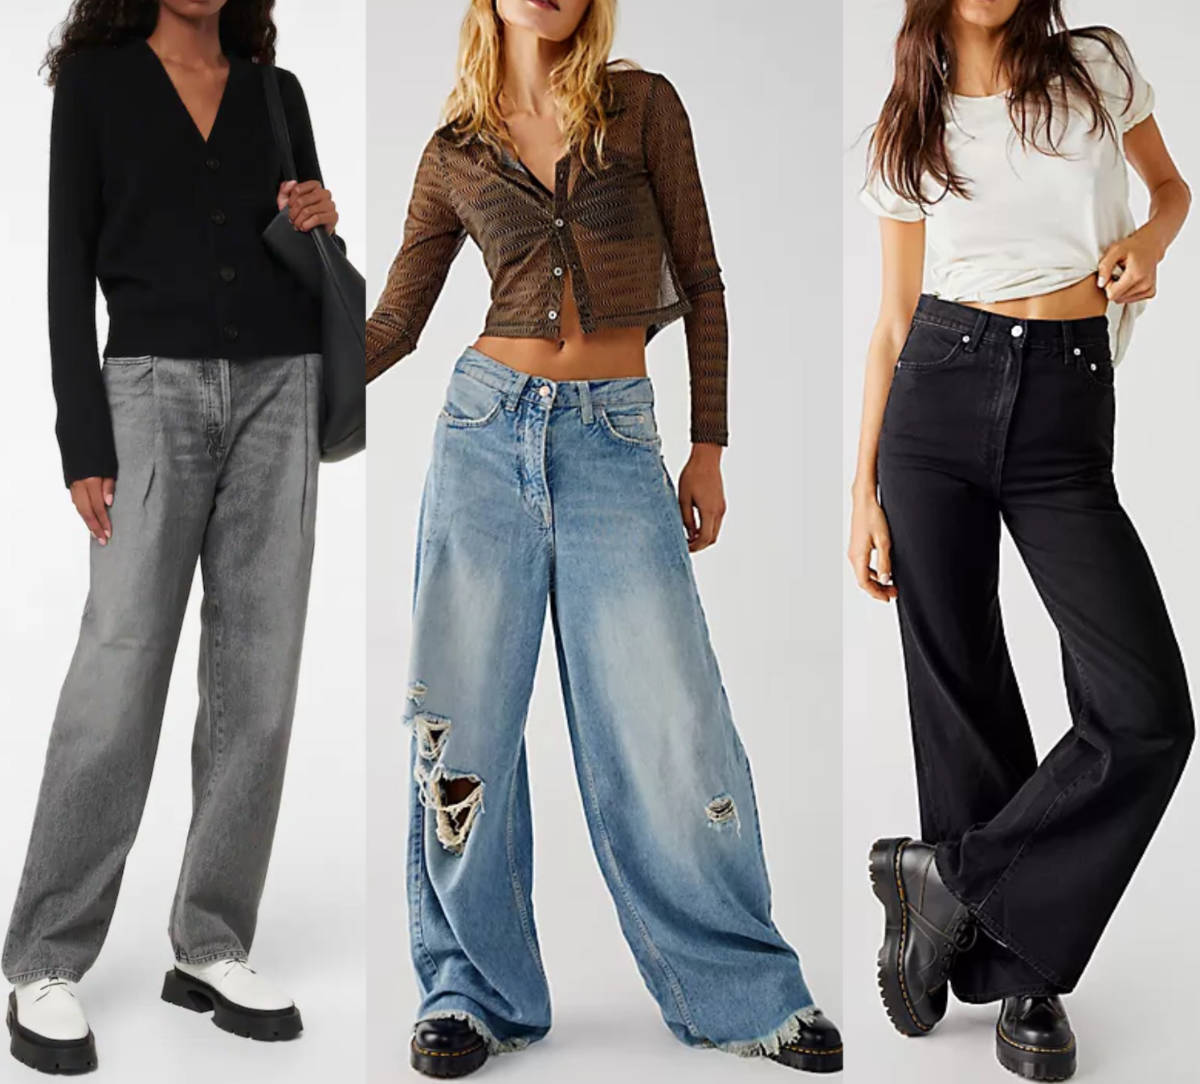 3 women wearing combat boots with baggy jeans outfits.